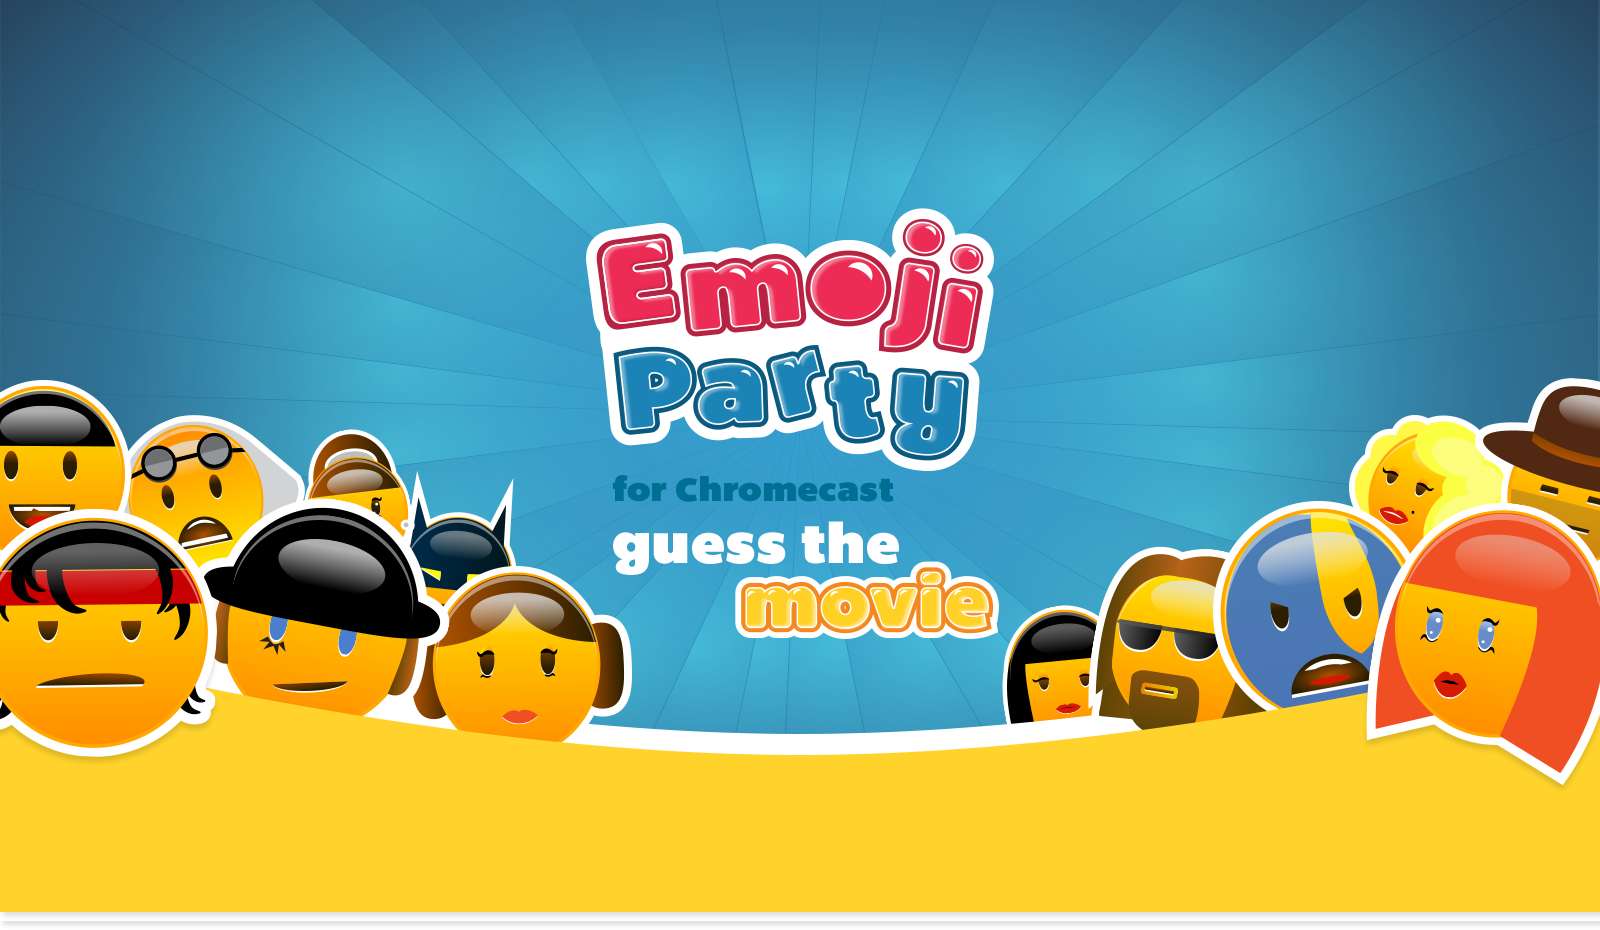 Emoji Party for Chromecast is awesome